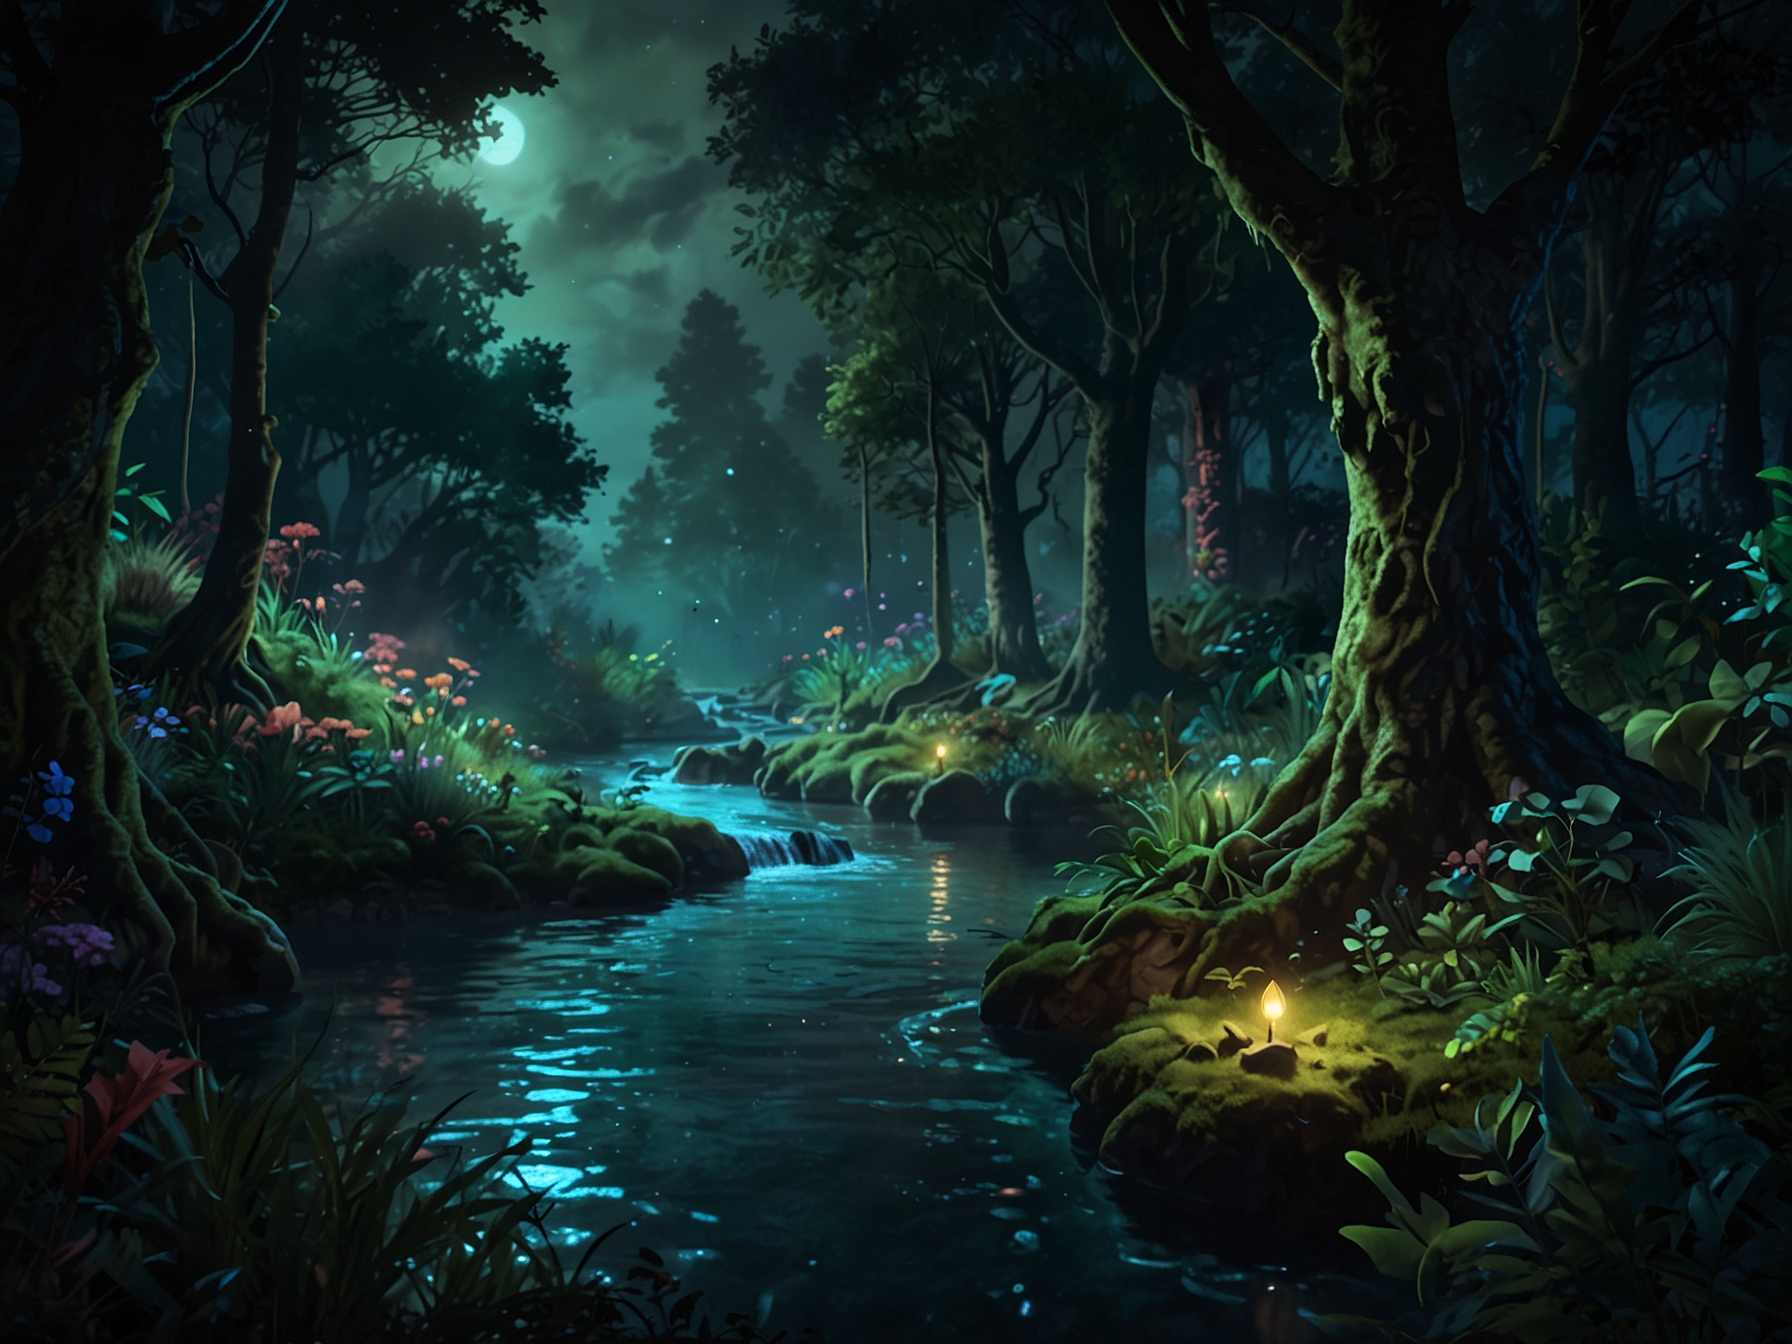 An enchanted forest with flowing water, lush greenery, and mystical creatures, rendered in high detail by Runway Gen-3. The video captures the ethereal glow of a moonlit landscape, highlighting the AI's advanced texture handling.